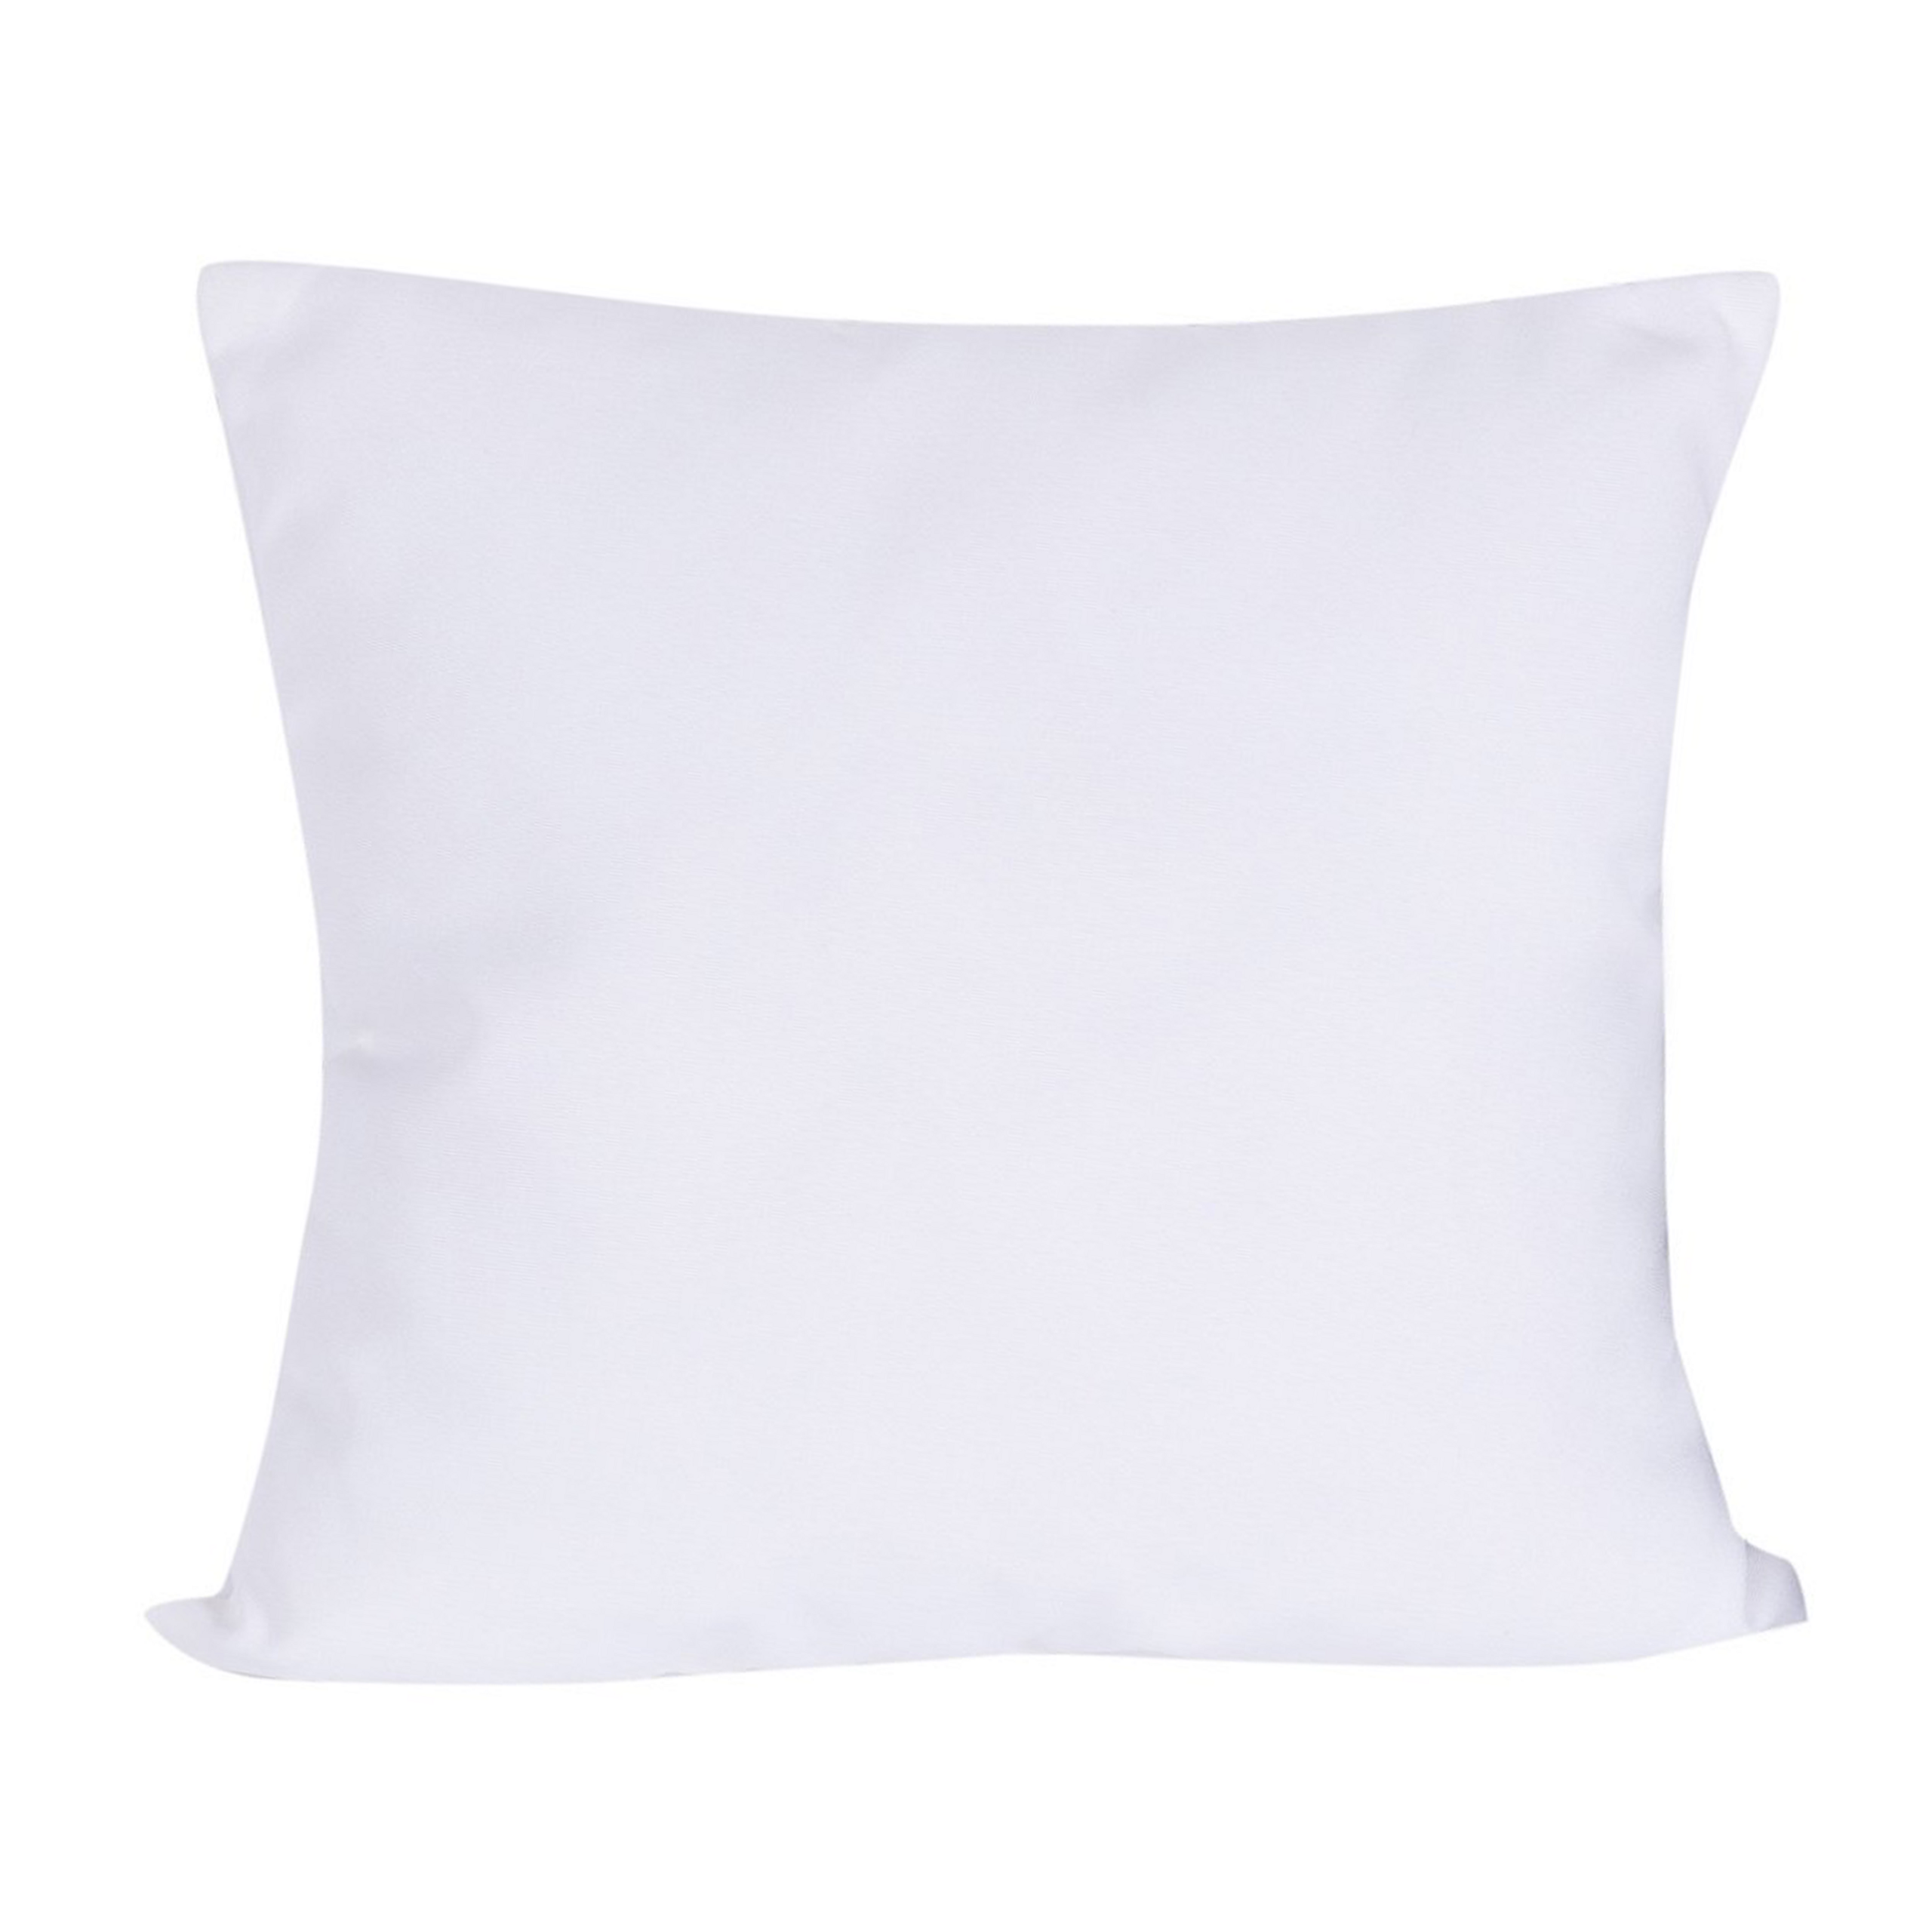 Beliani Outdoor Garden Cushion White 50 x 50 cm Water Resistant Removable Cover